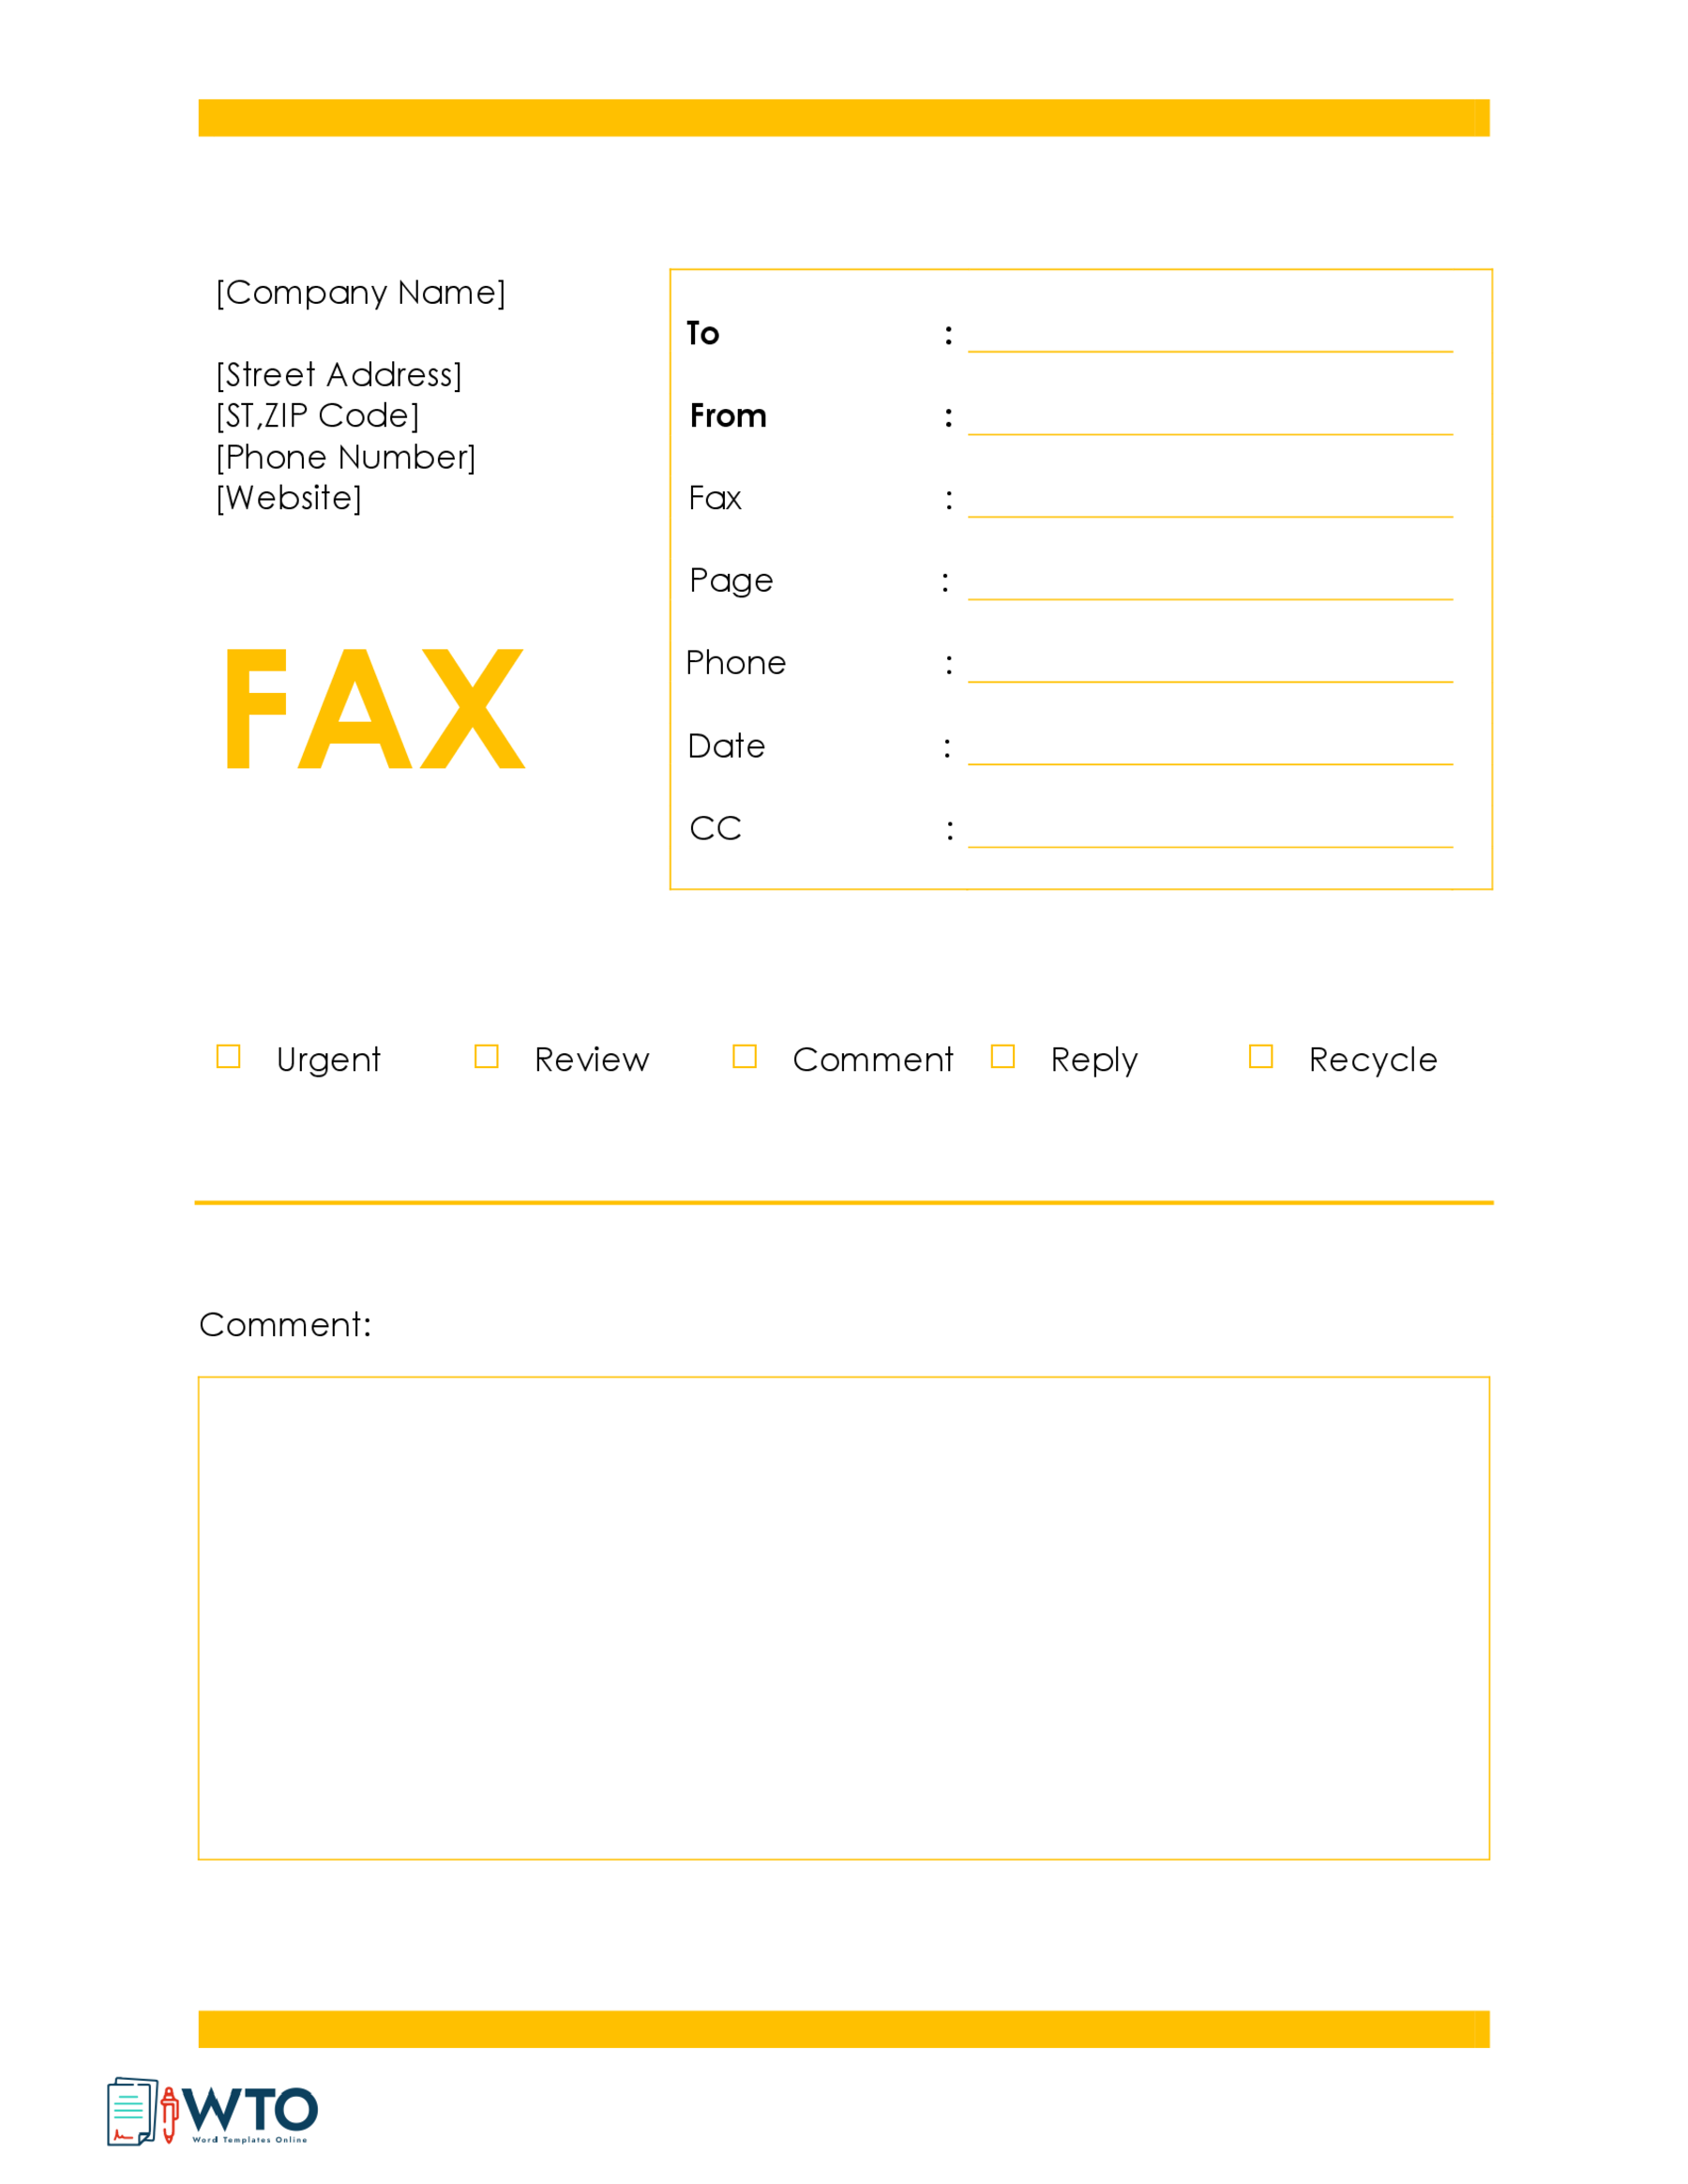 Fax Cover Sheet Template in Word Format